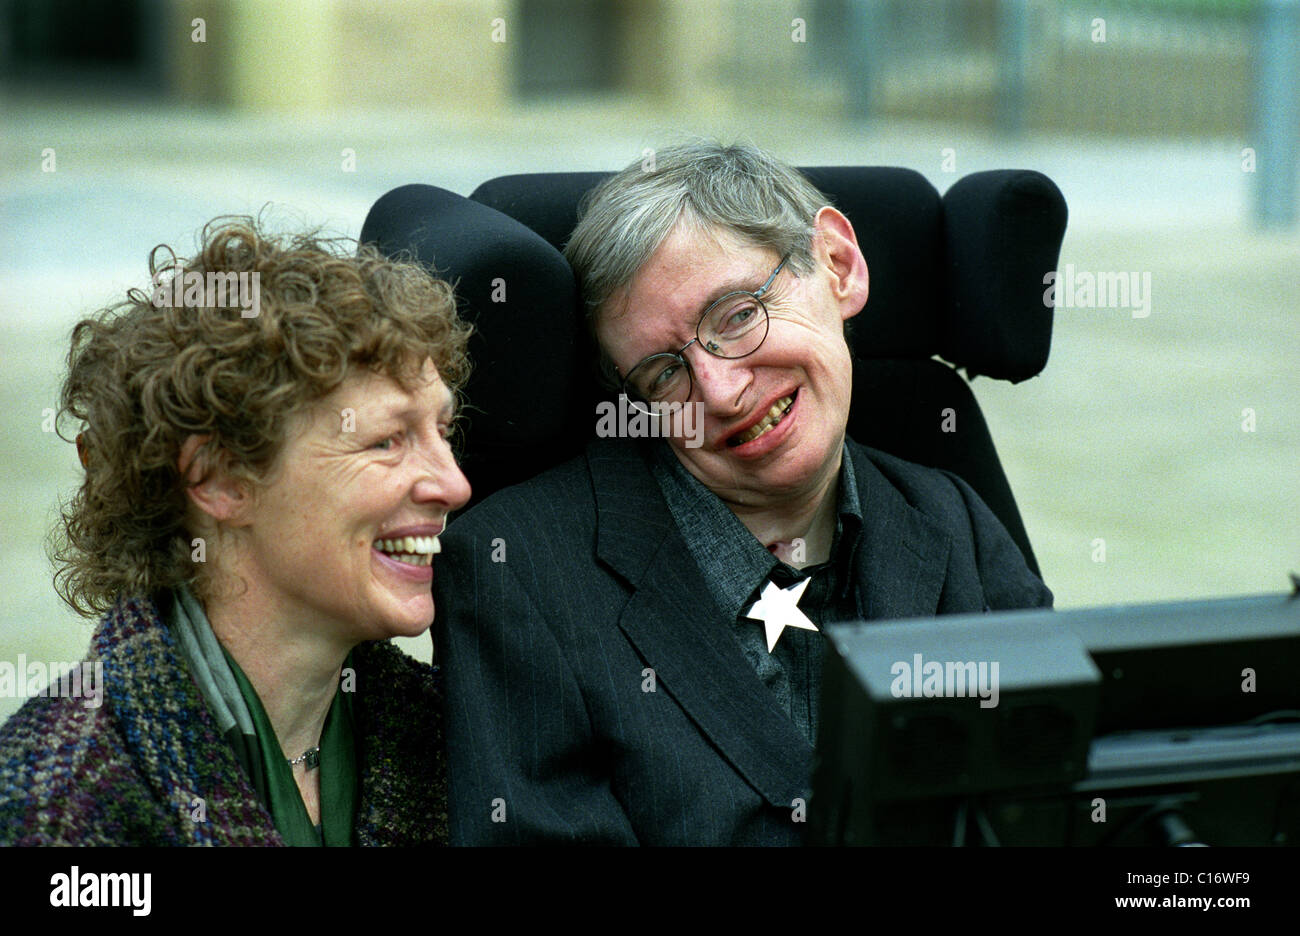 COPYRIGHT OWNED PHOTOGRAPH BY BRIAN HARRIS - 11/1/02 Prof. Stephen Hawking in Cambridge,England. 60th BIRTHDAY CELEBRATIONS FOR STEPHEN HAWKING CH CBE Stock Photo